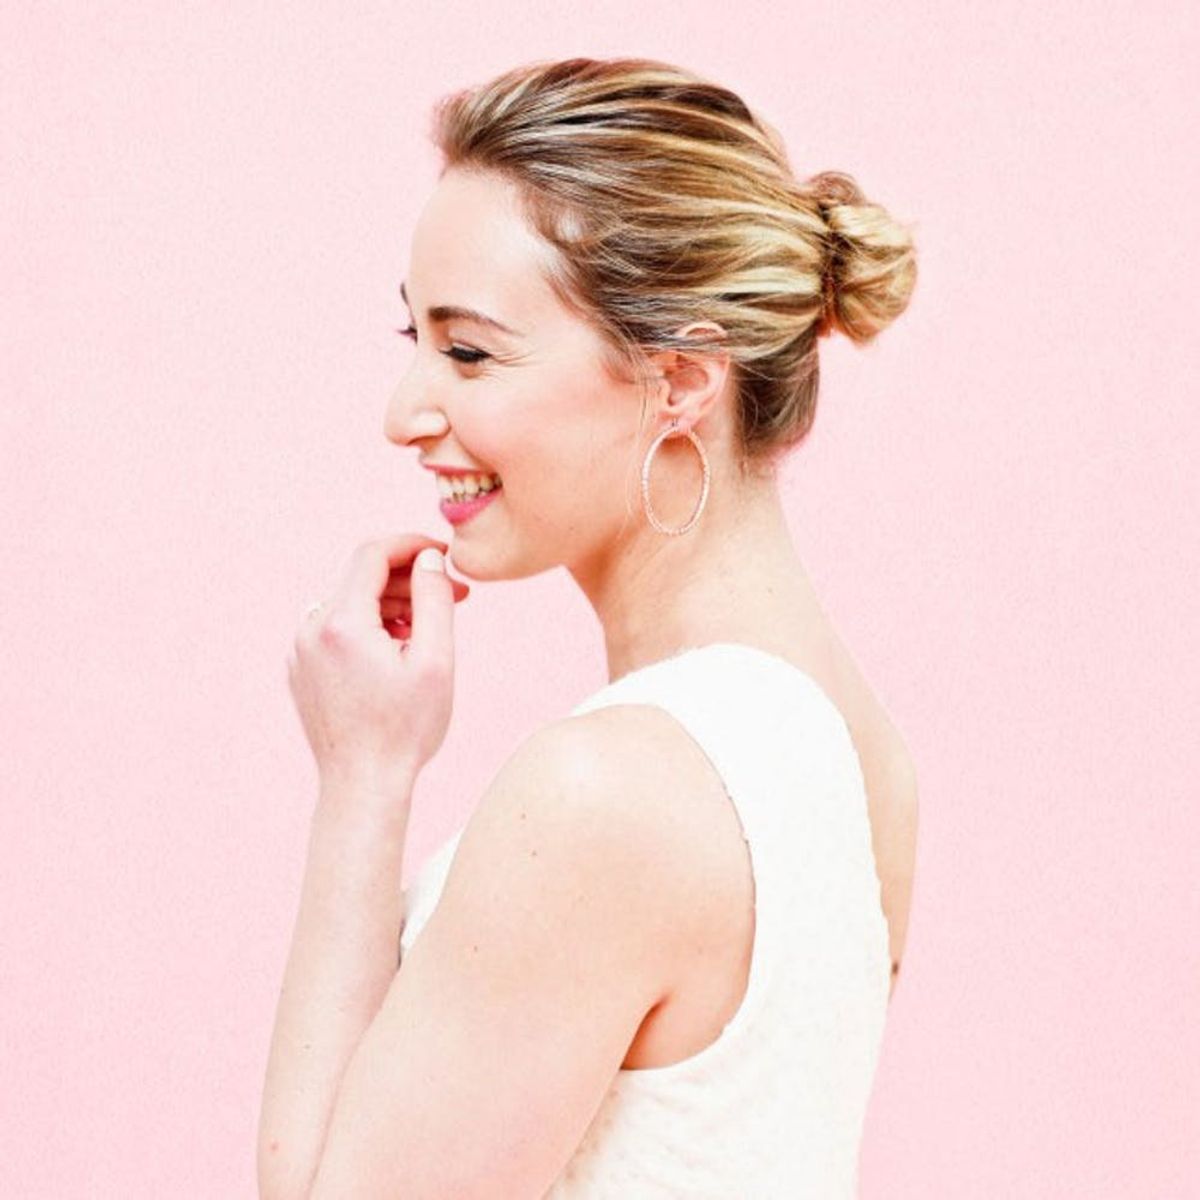 You’ve Been Putting Your Hair in a Bun Wrong This Whole Time